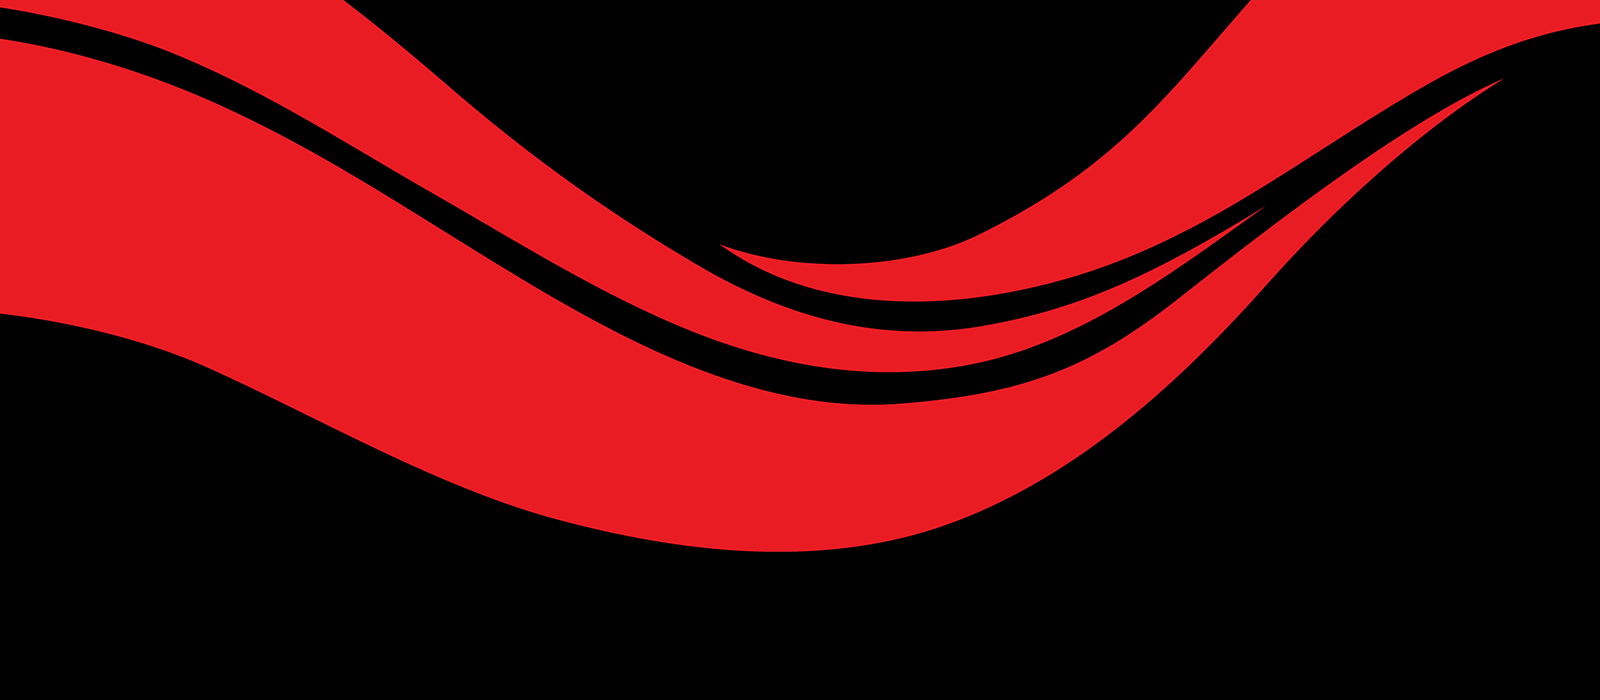 A black background with a red wave cutting across.